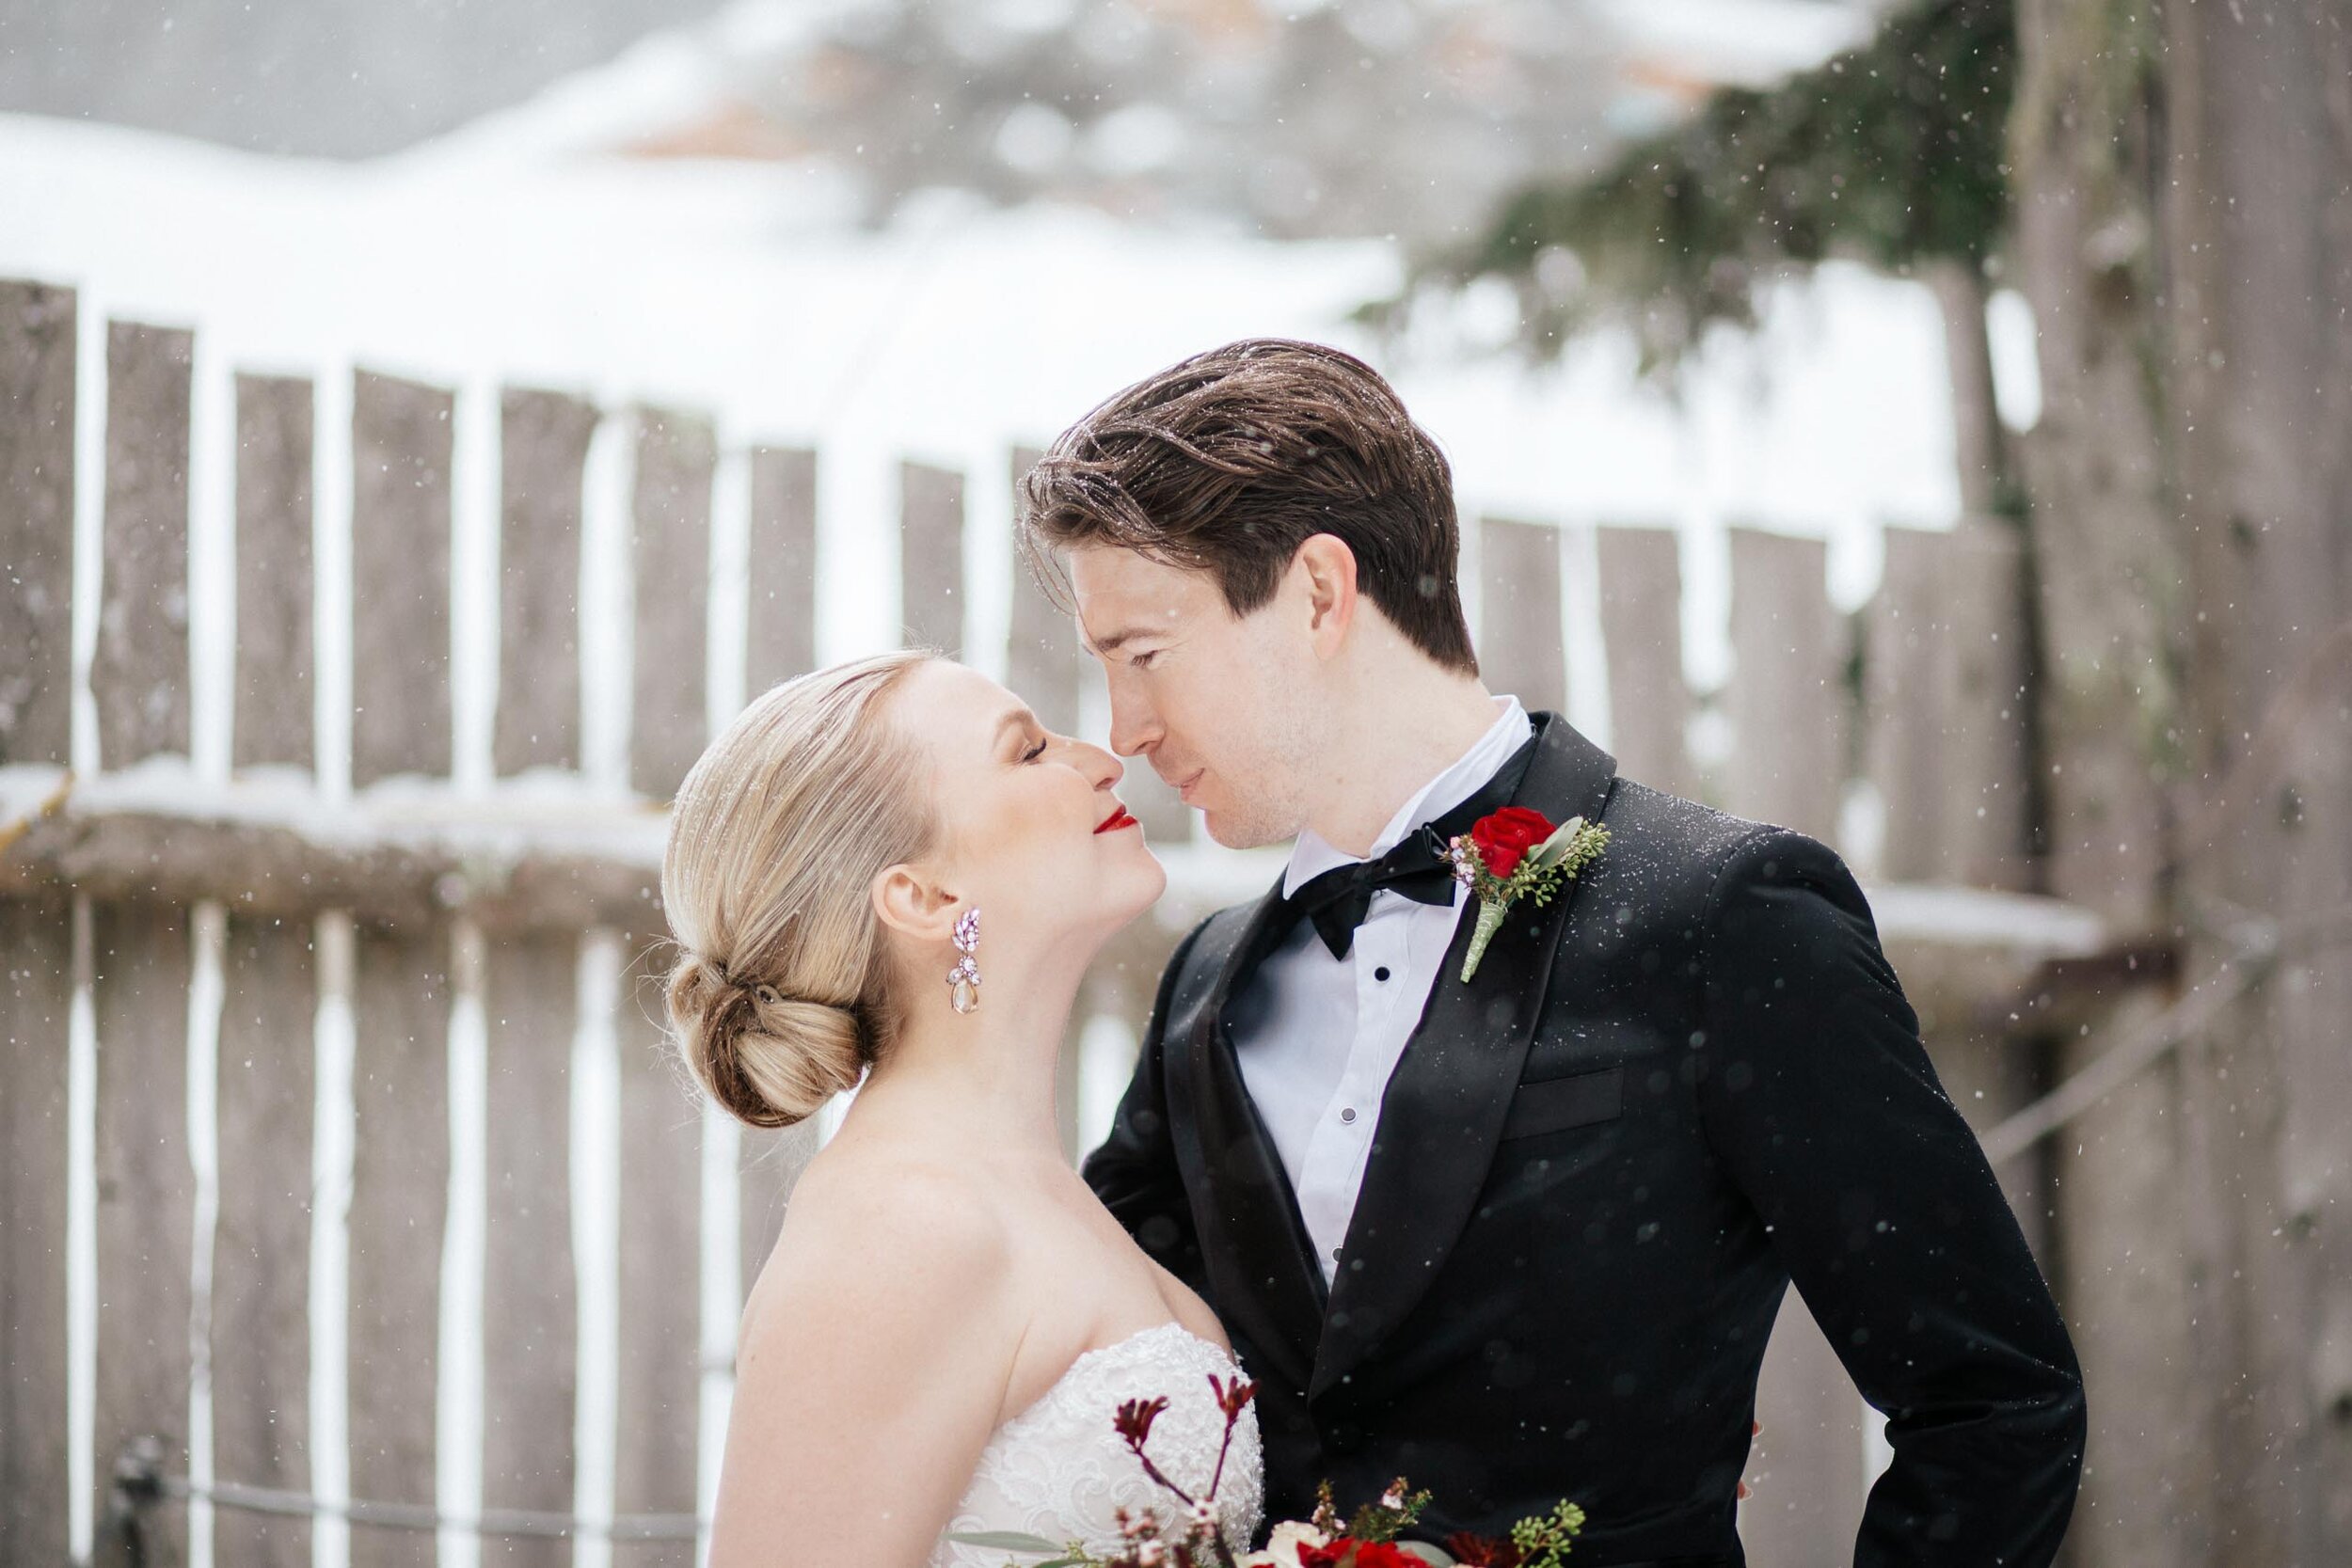 A beautiful blonde bride with bright red lips leans in for a kiss from her groom as the snow falls on them in Whistler, BC.